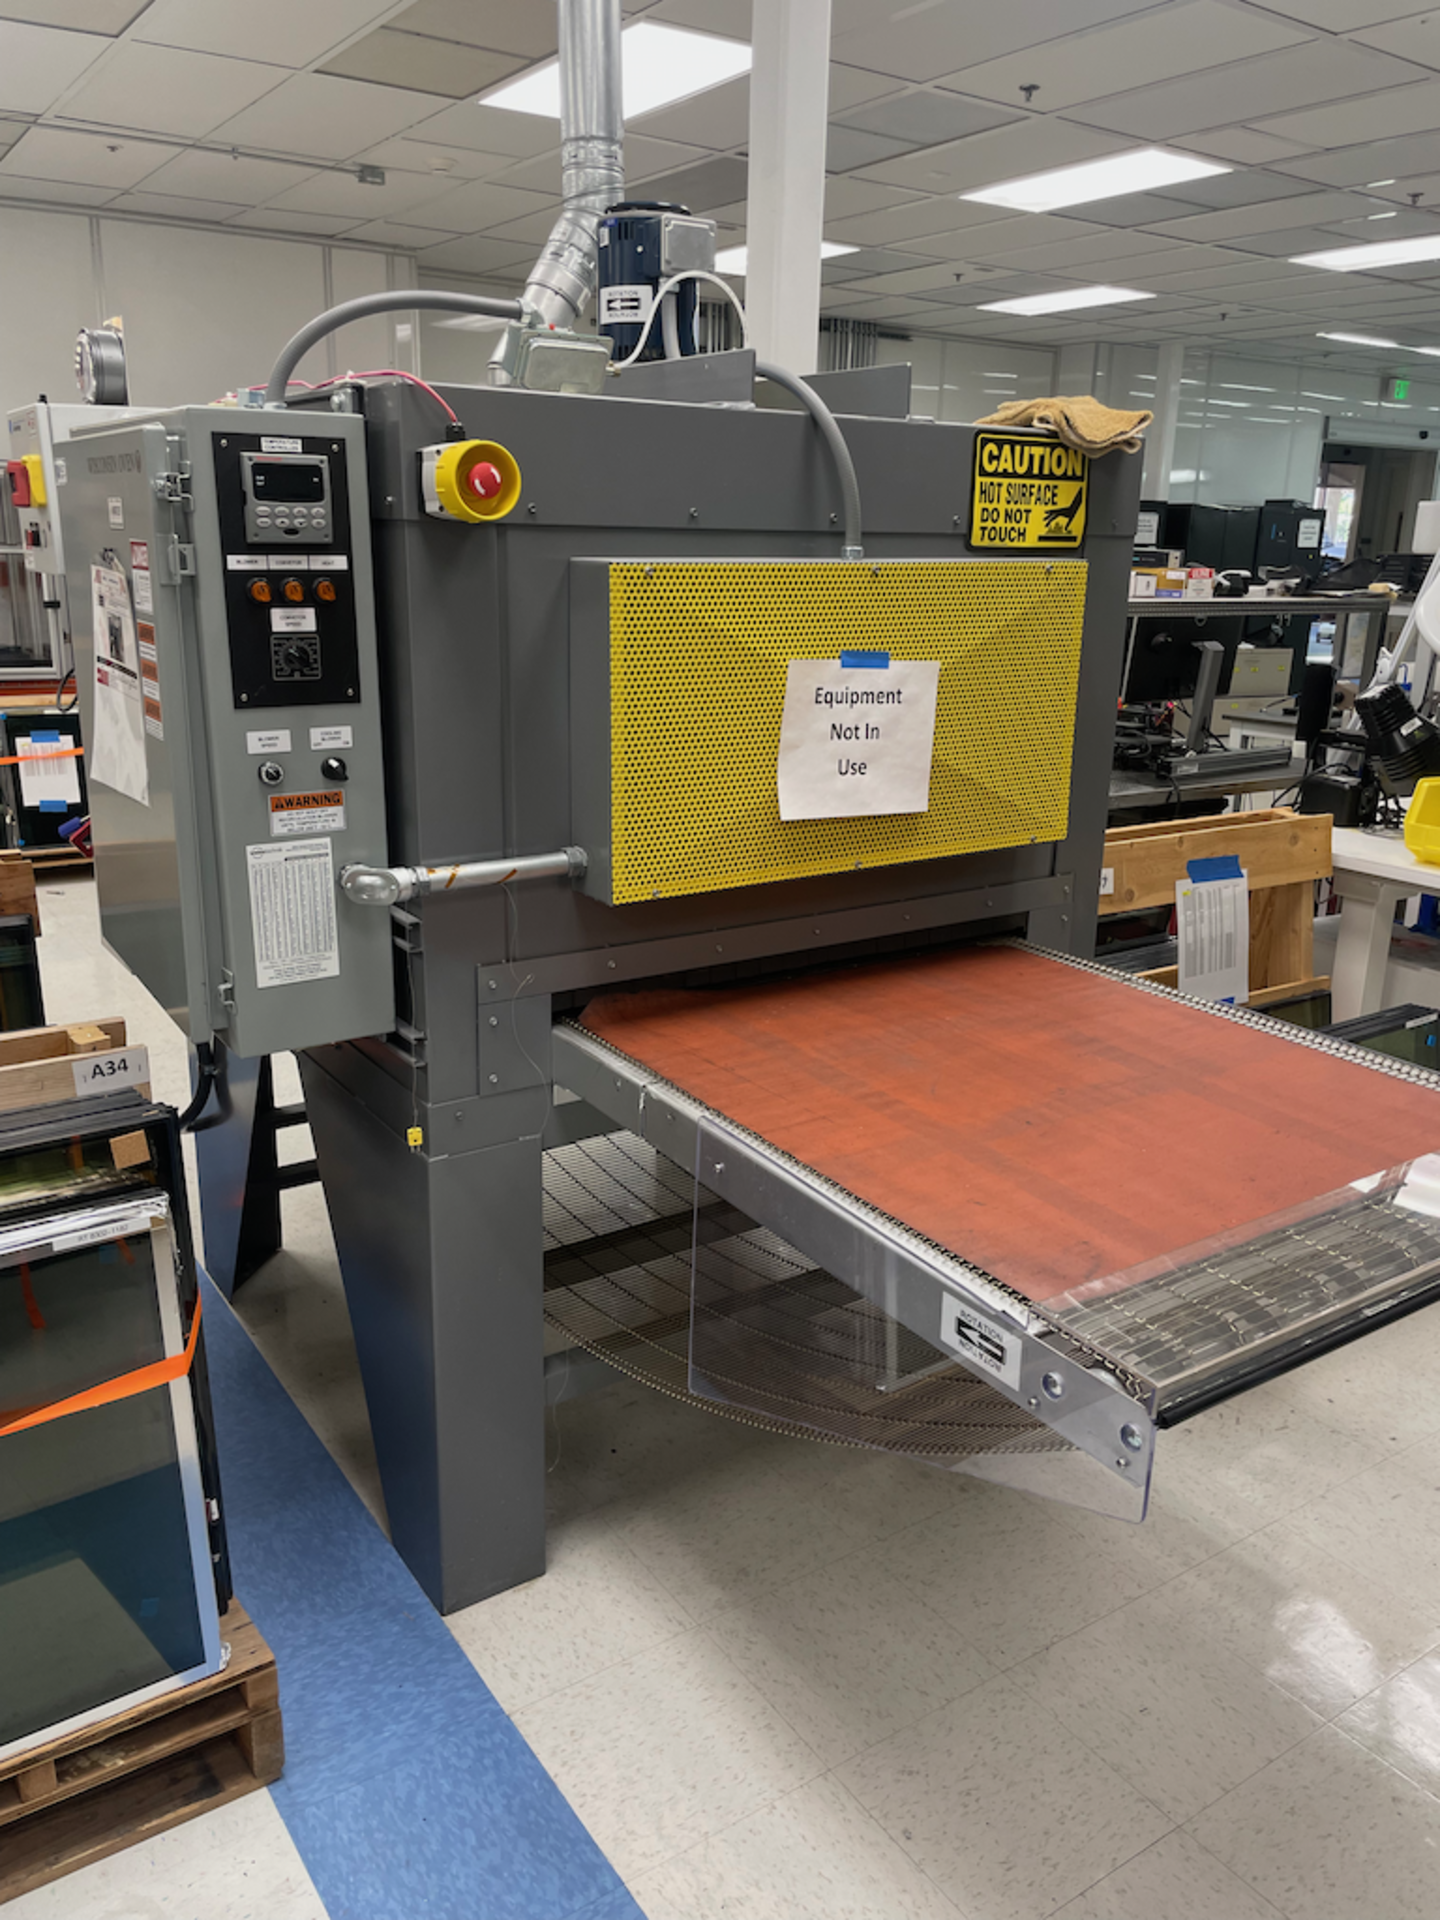 WISCONSIN OVEN CORP. MODEL SPC-34-HTS/109 REFLOW OVEN - LOCATED AT 999 N 10TH ST, SJ, CA